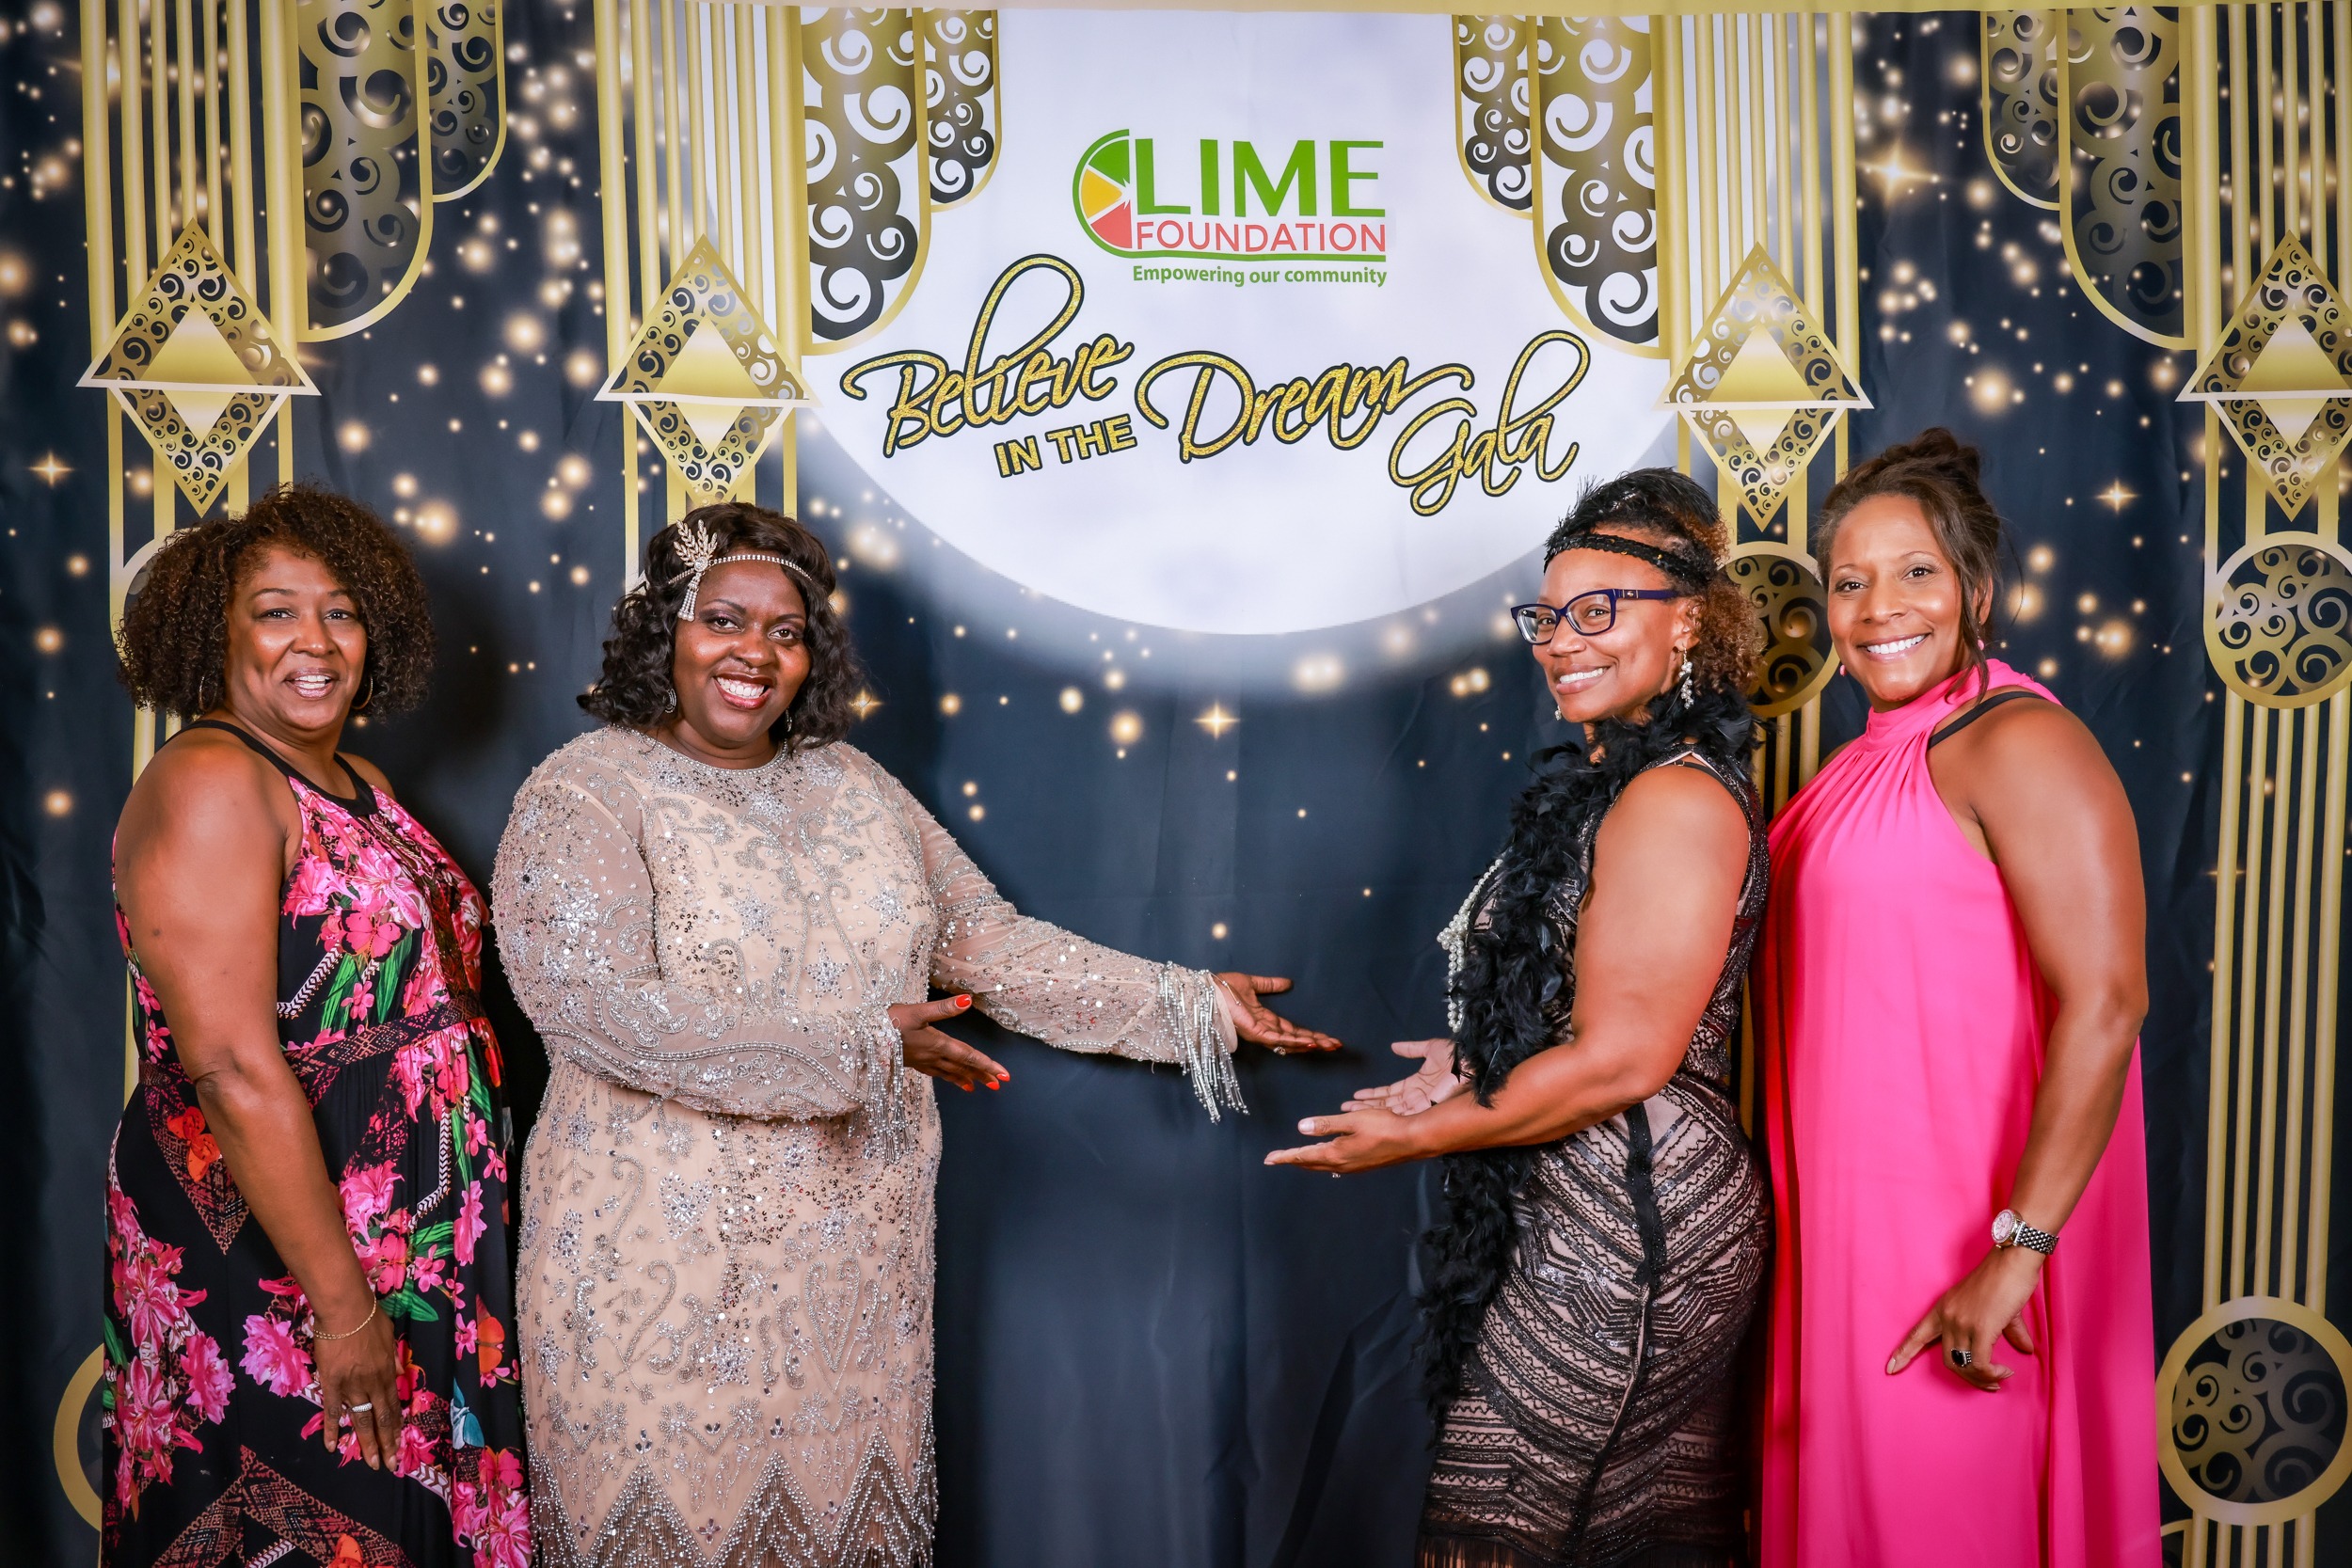 Four women posing for a picture in front of a backdrop at the LIME Foundation.